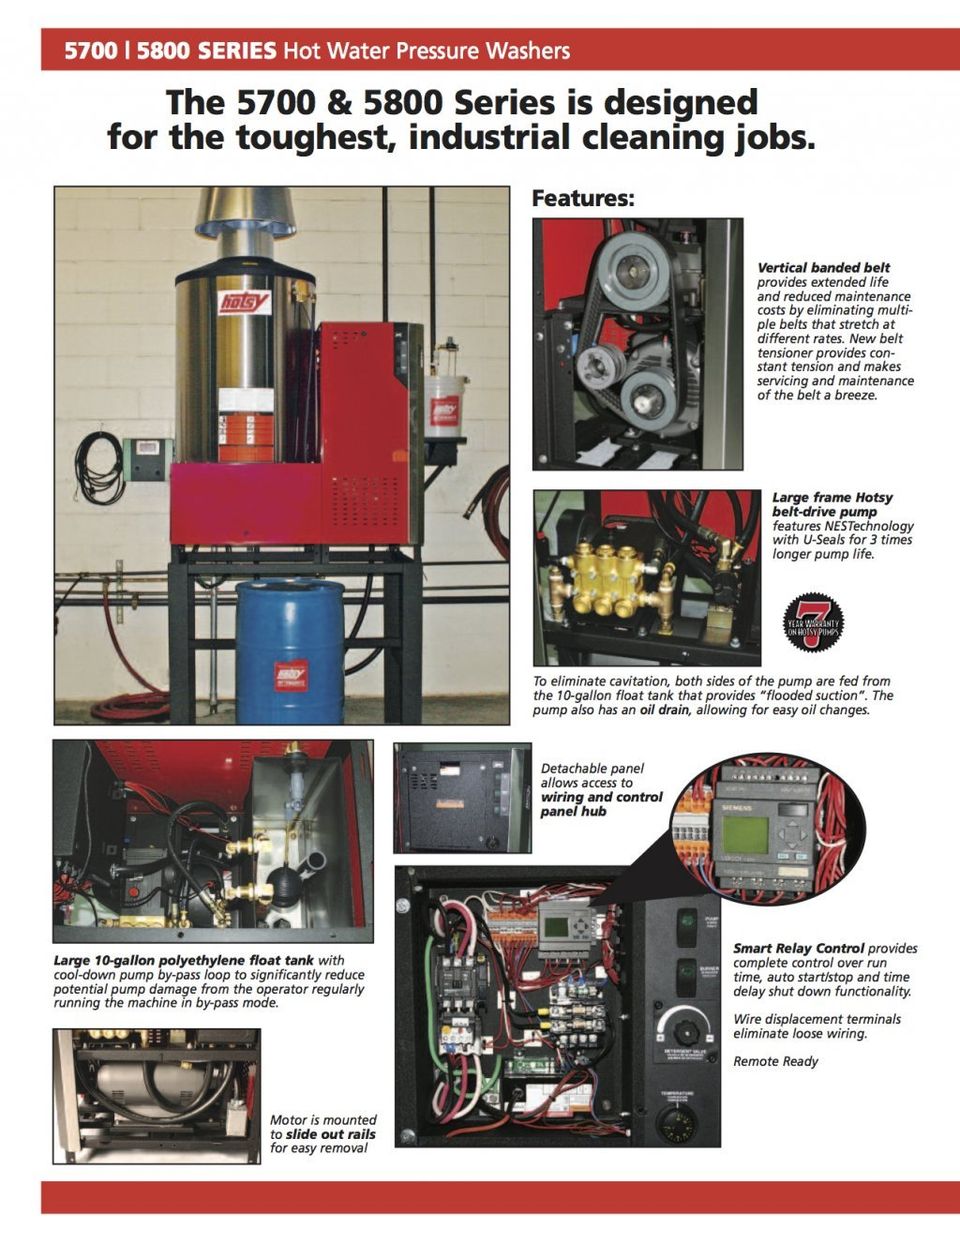 Hotsy Hot Water Pressure Washer 5700/ 5800 Series Product Sheet -- Page 2